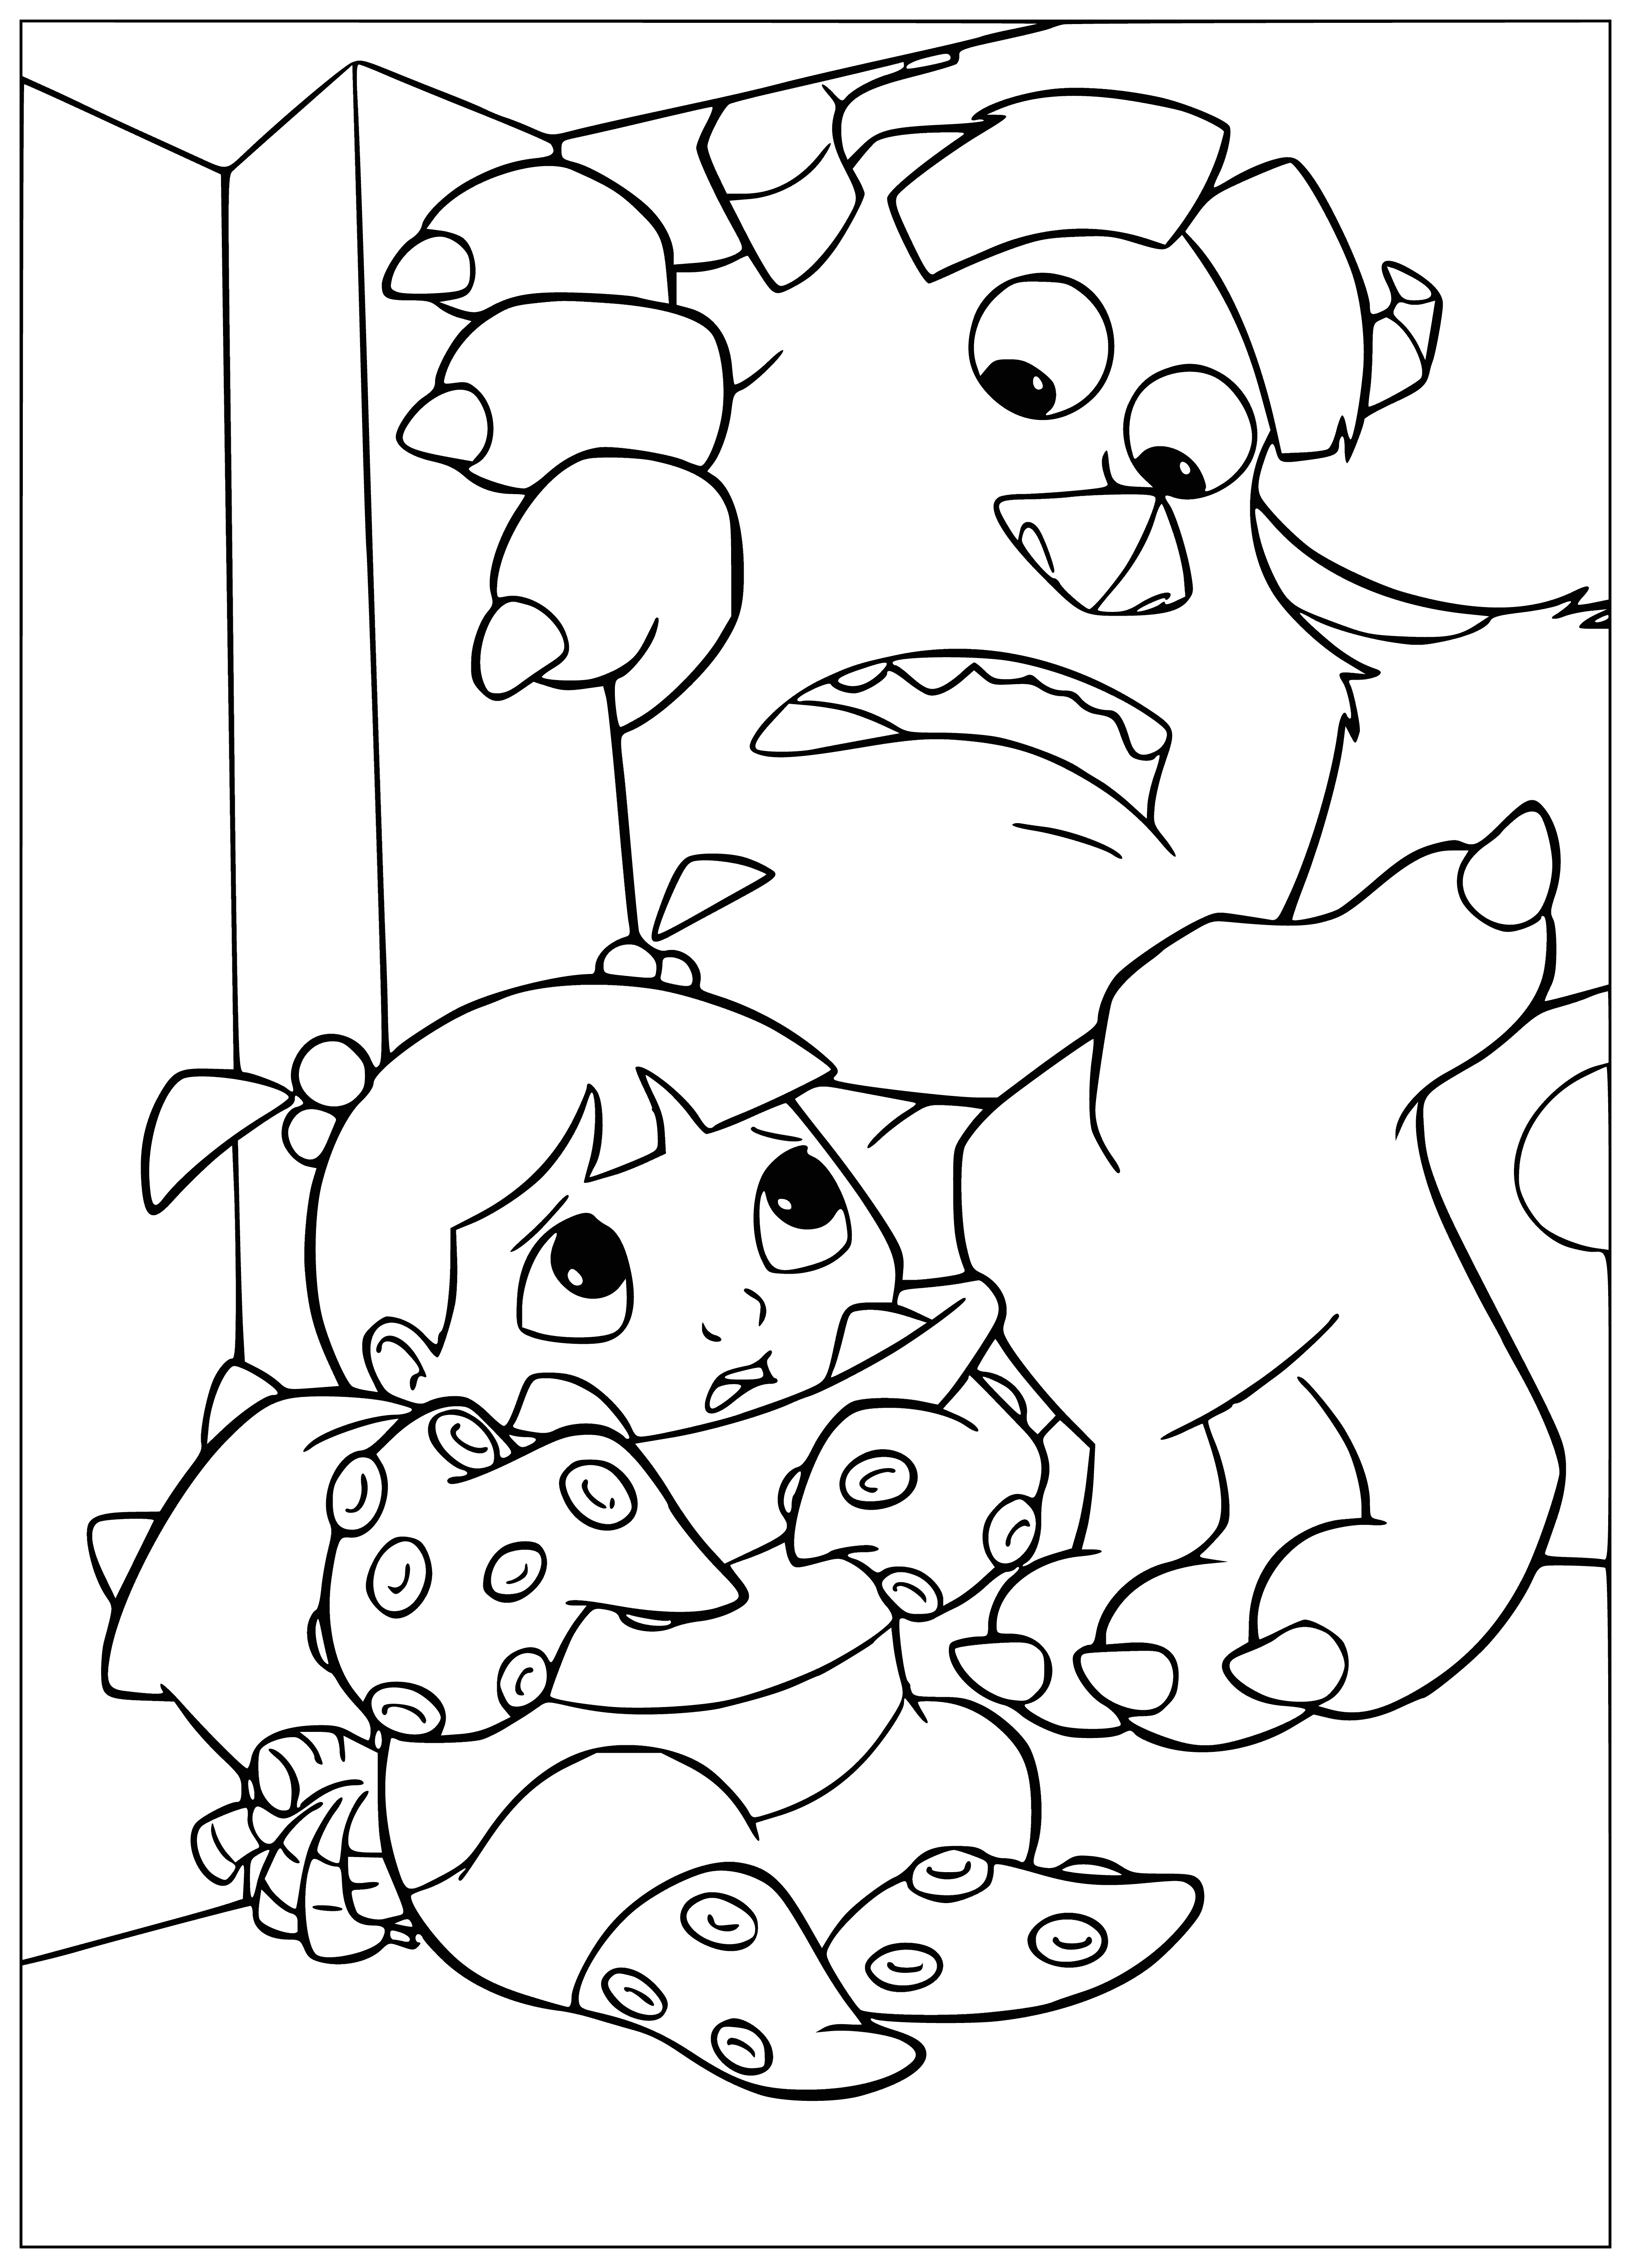 coloring page: Scared child comforted by large, glowing furry monsters in dark bedroom.